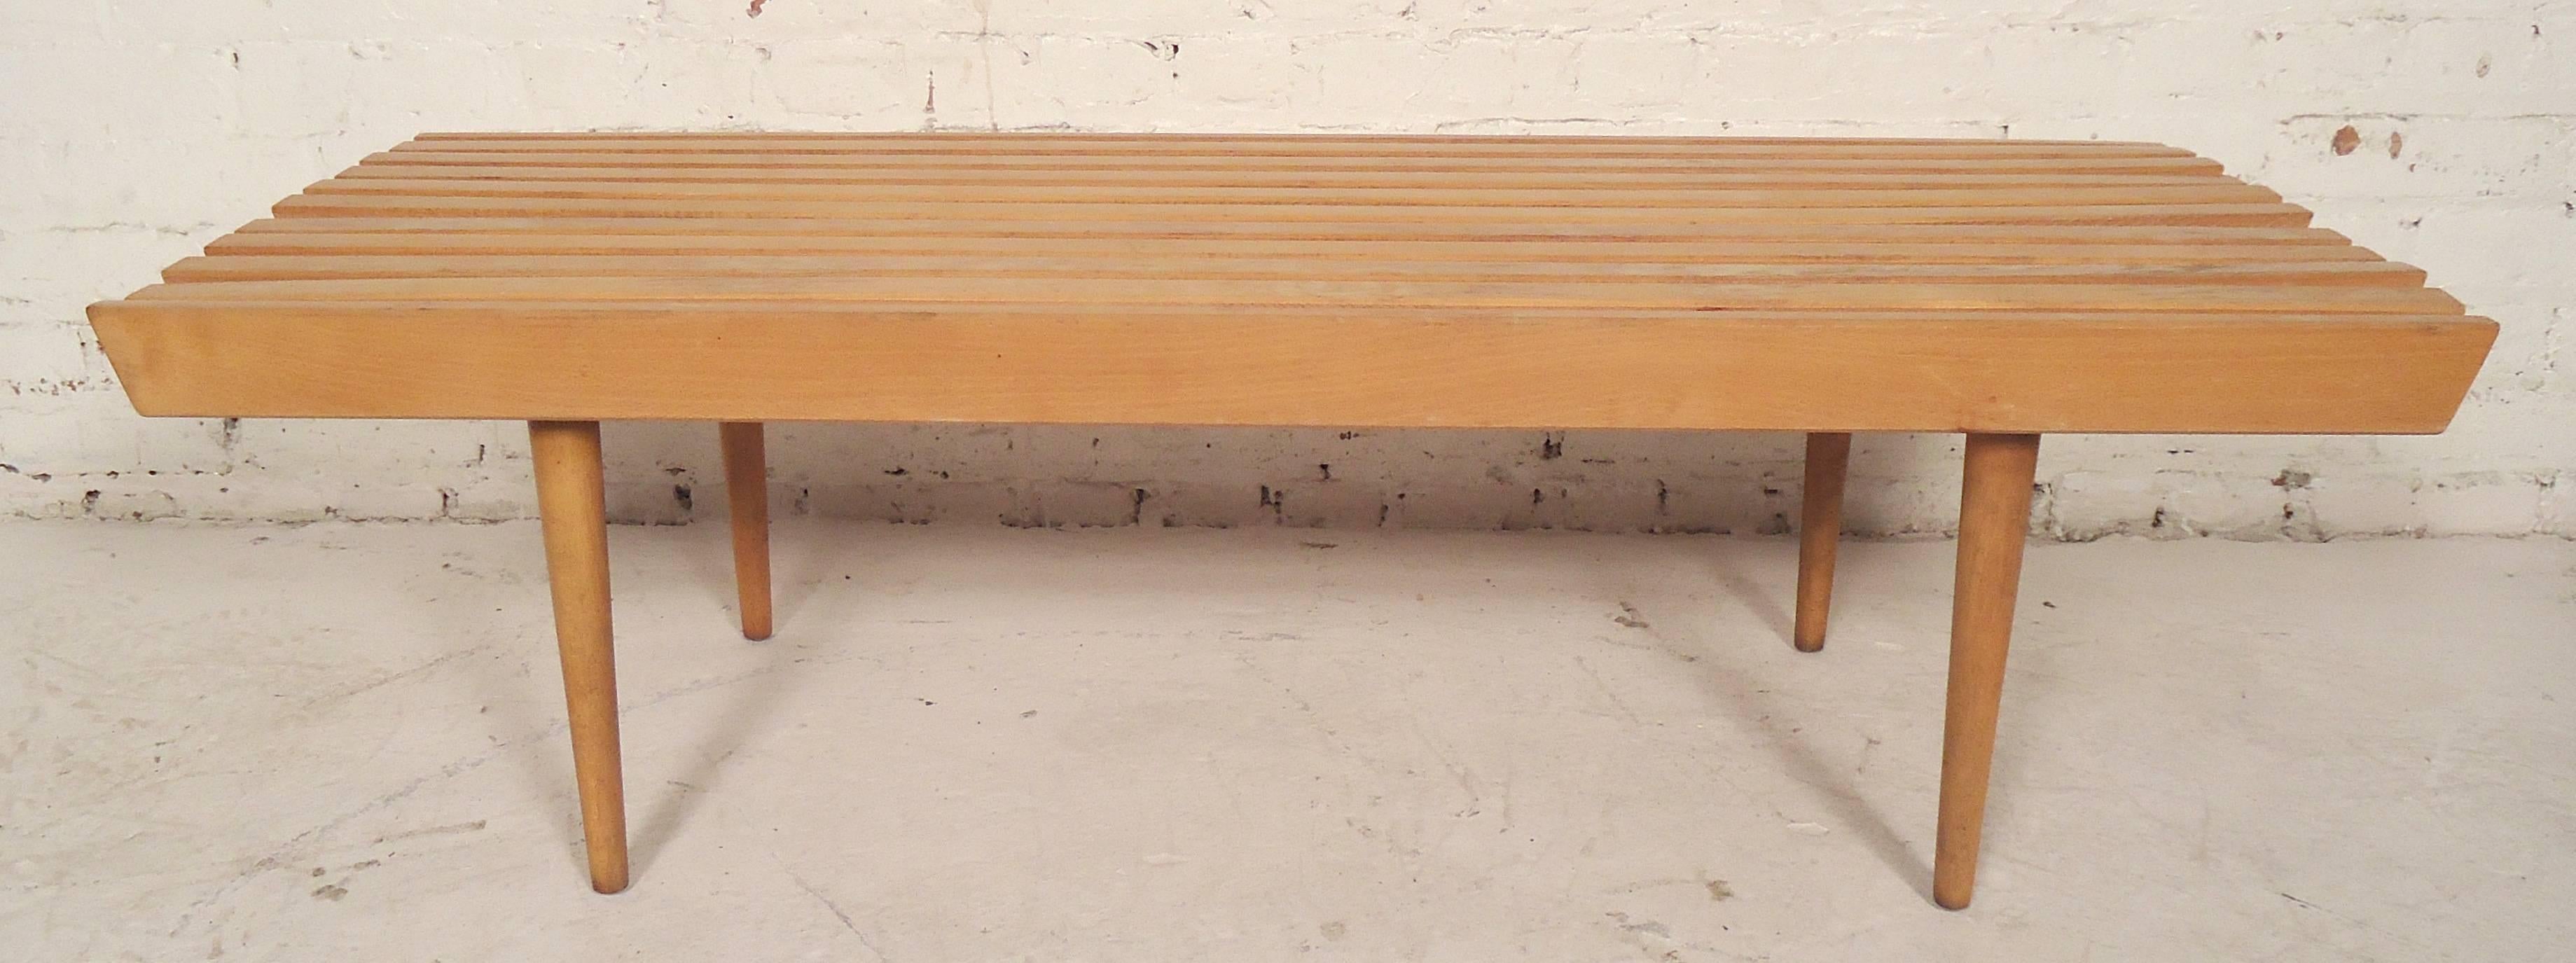 Classic vintage modern table or bench in the style of a George Nelson slat bench. Tight wood slats and tapered cone legs.

(Please confirm item location - NY or NJ - with dealer).
 